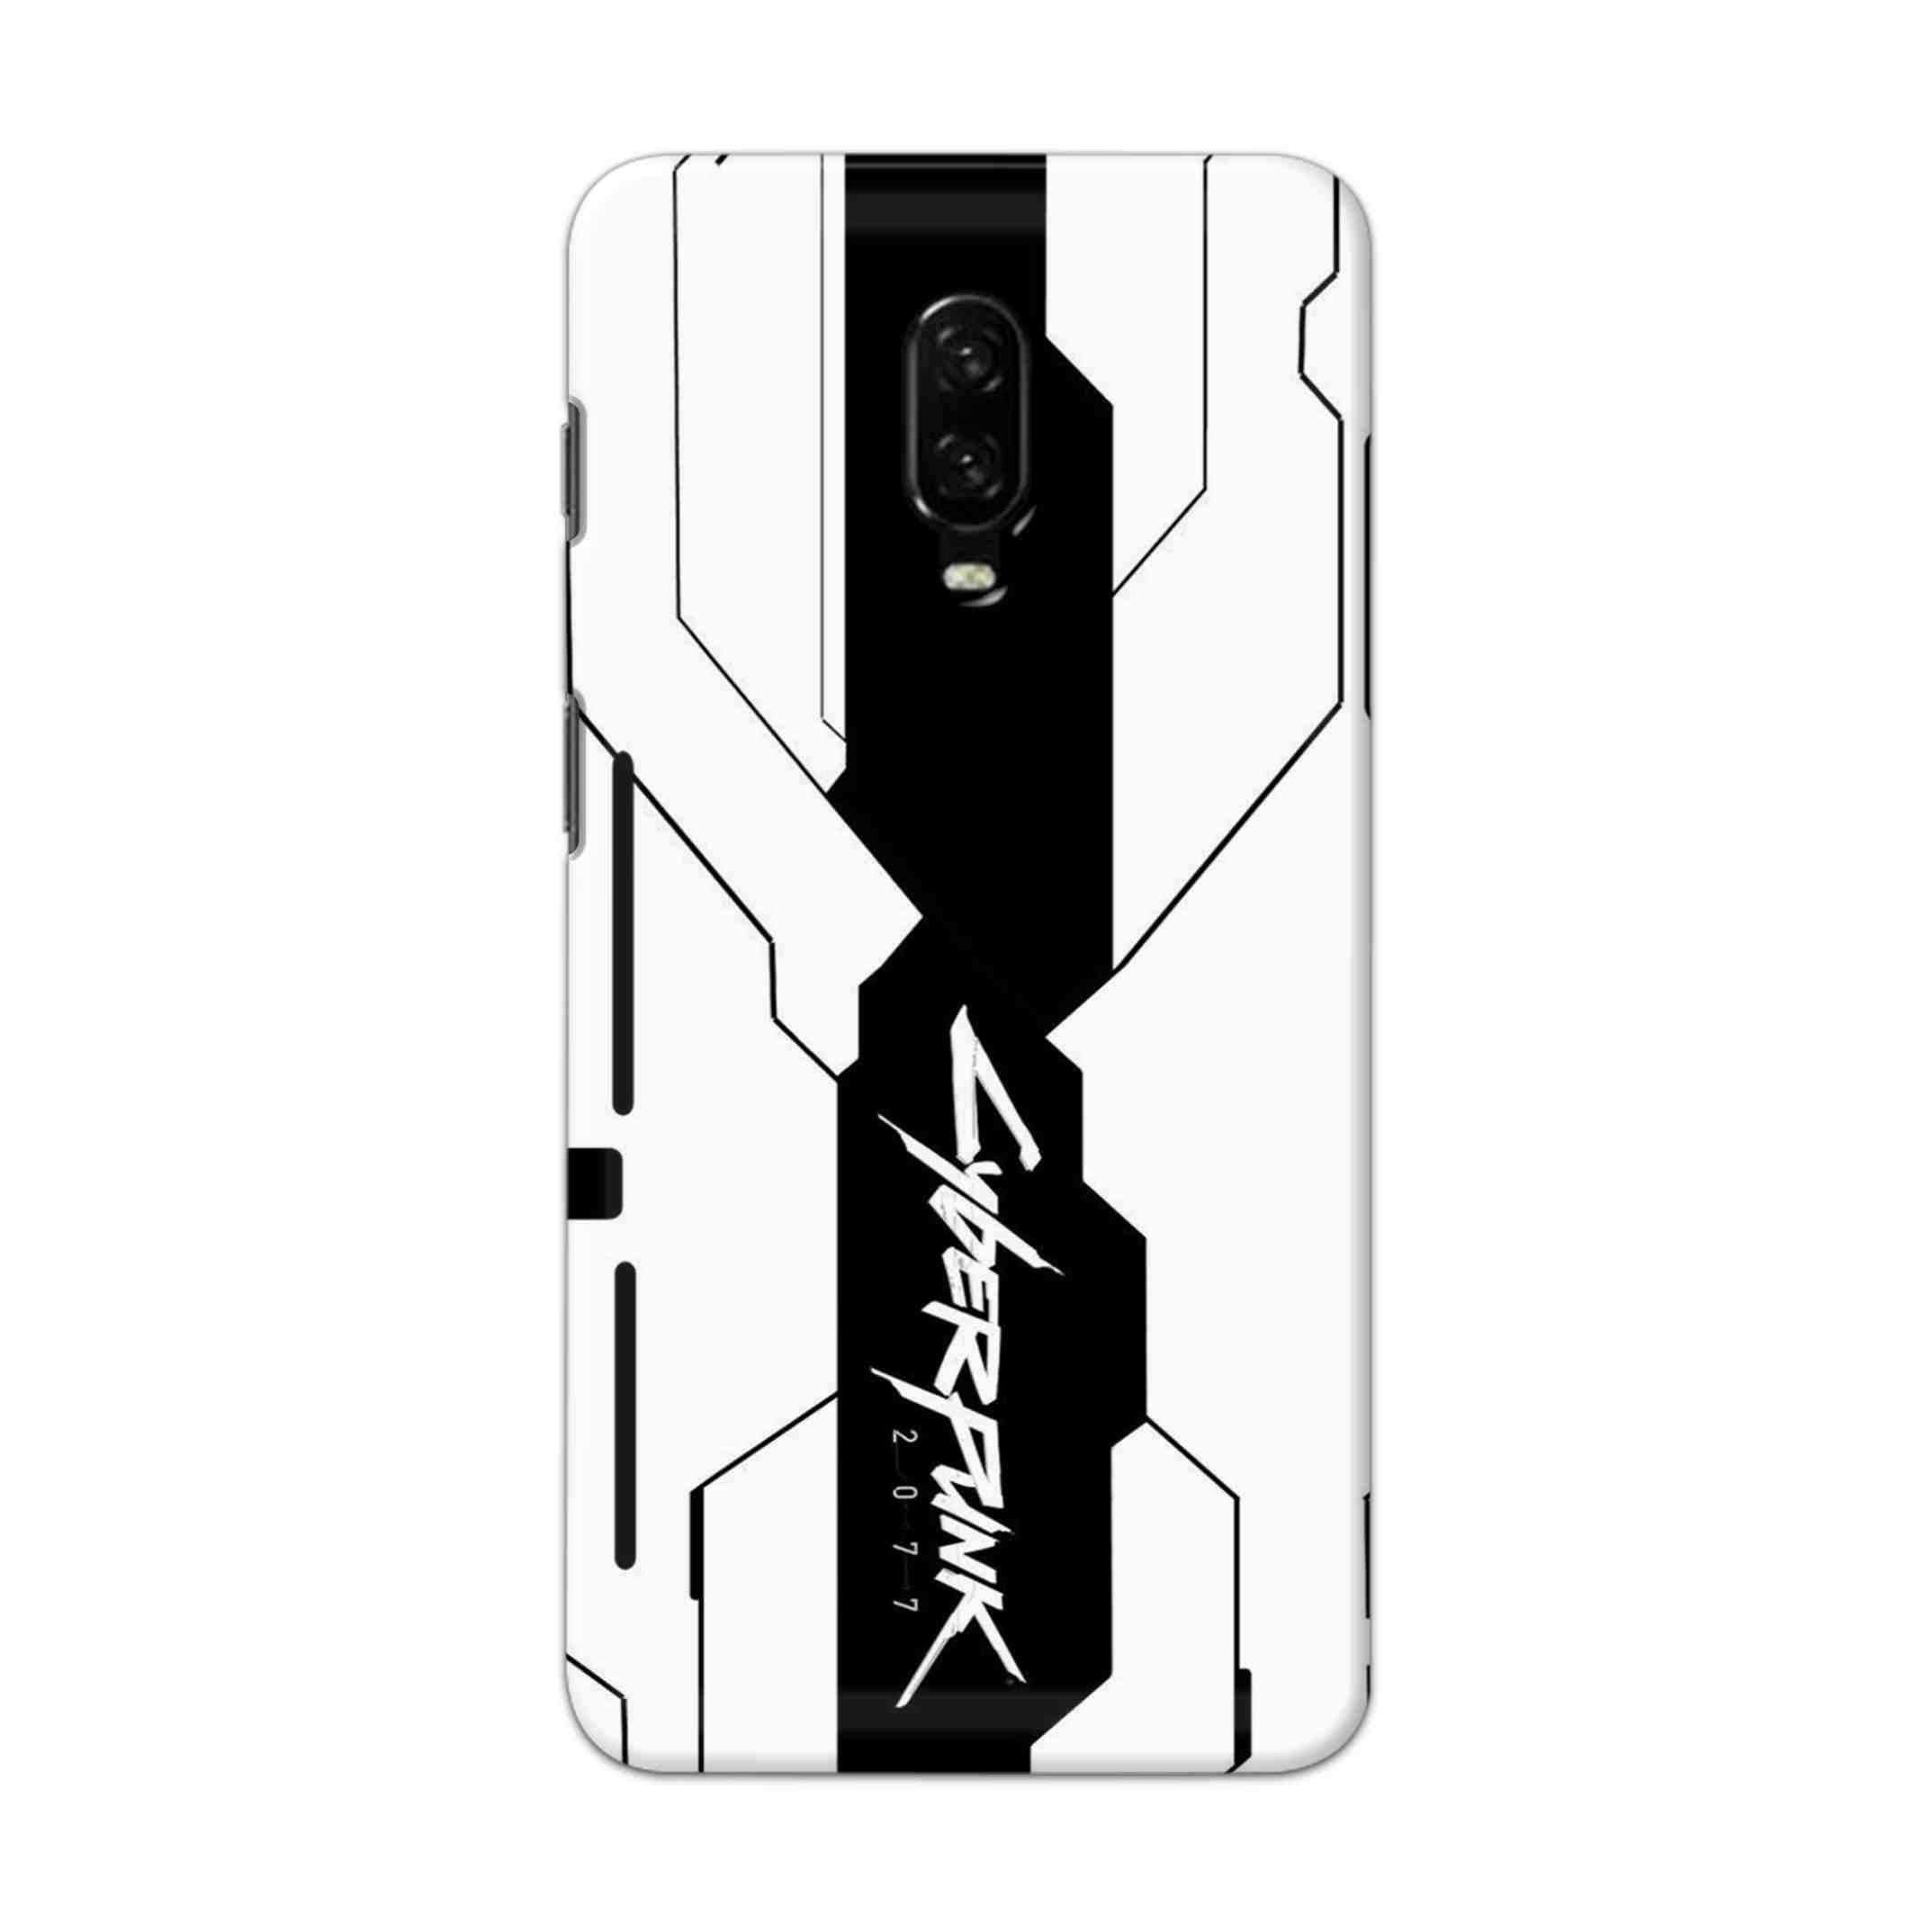 Buy Cyberpunk 2077 Hard Back Mobile Phone Case Cover For OnePlus 6T Online